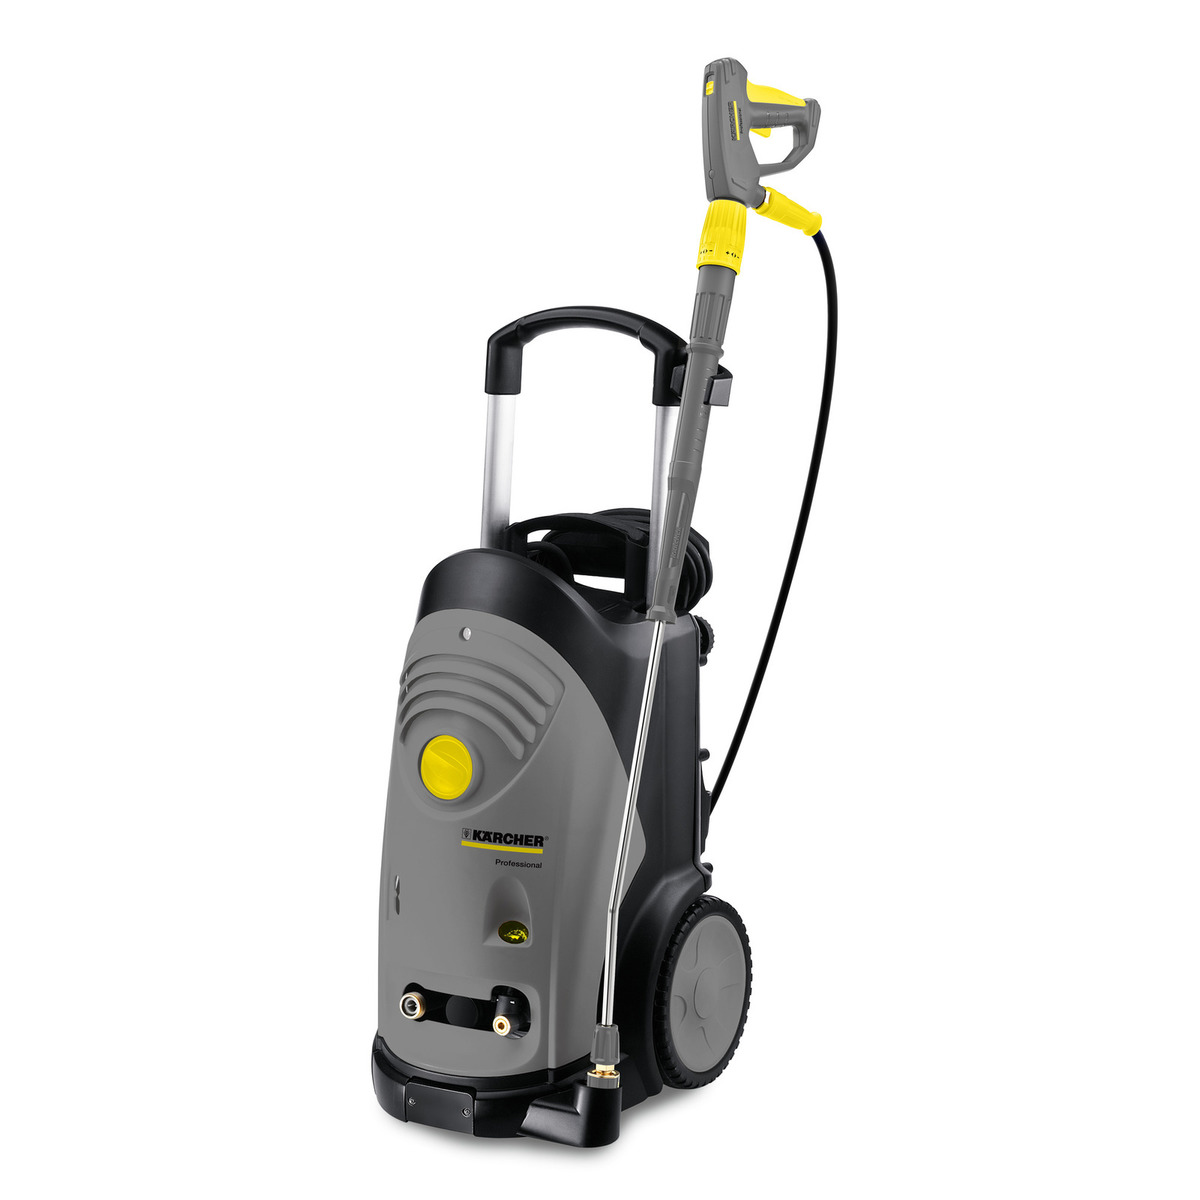 Karcher HD 6/15 M PLus EASY! Cold Water Pressure Washer